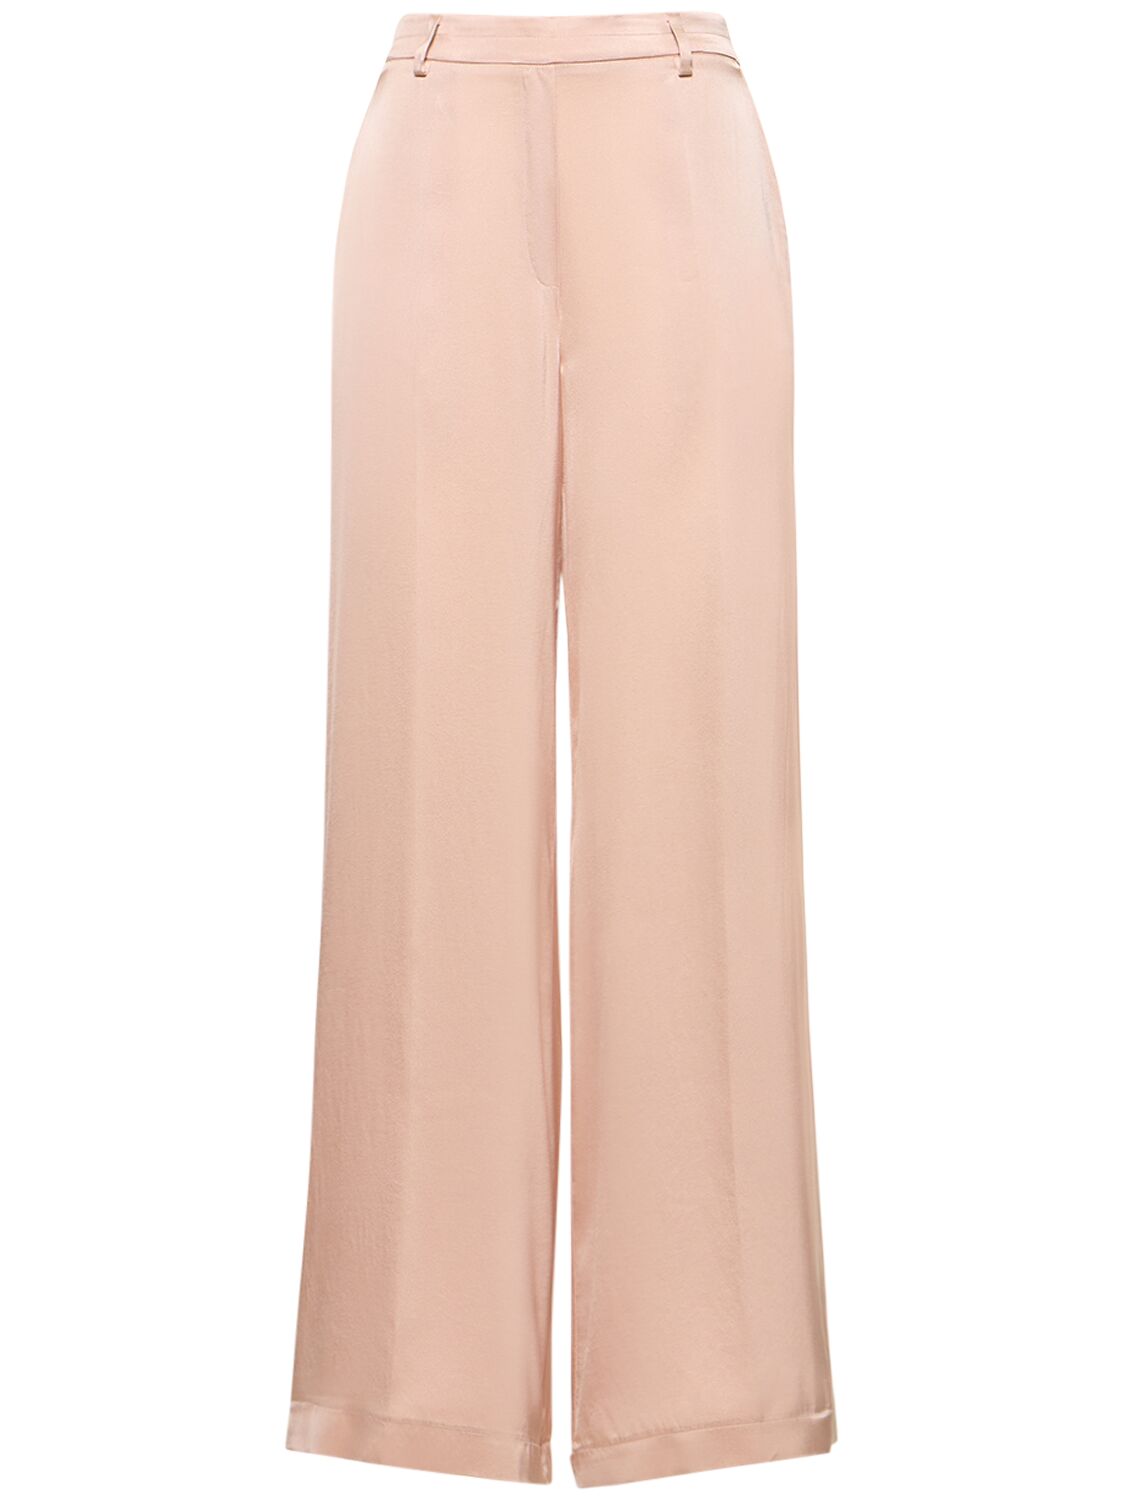 Image of Stretch Silk Satin Wide Pants